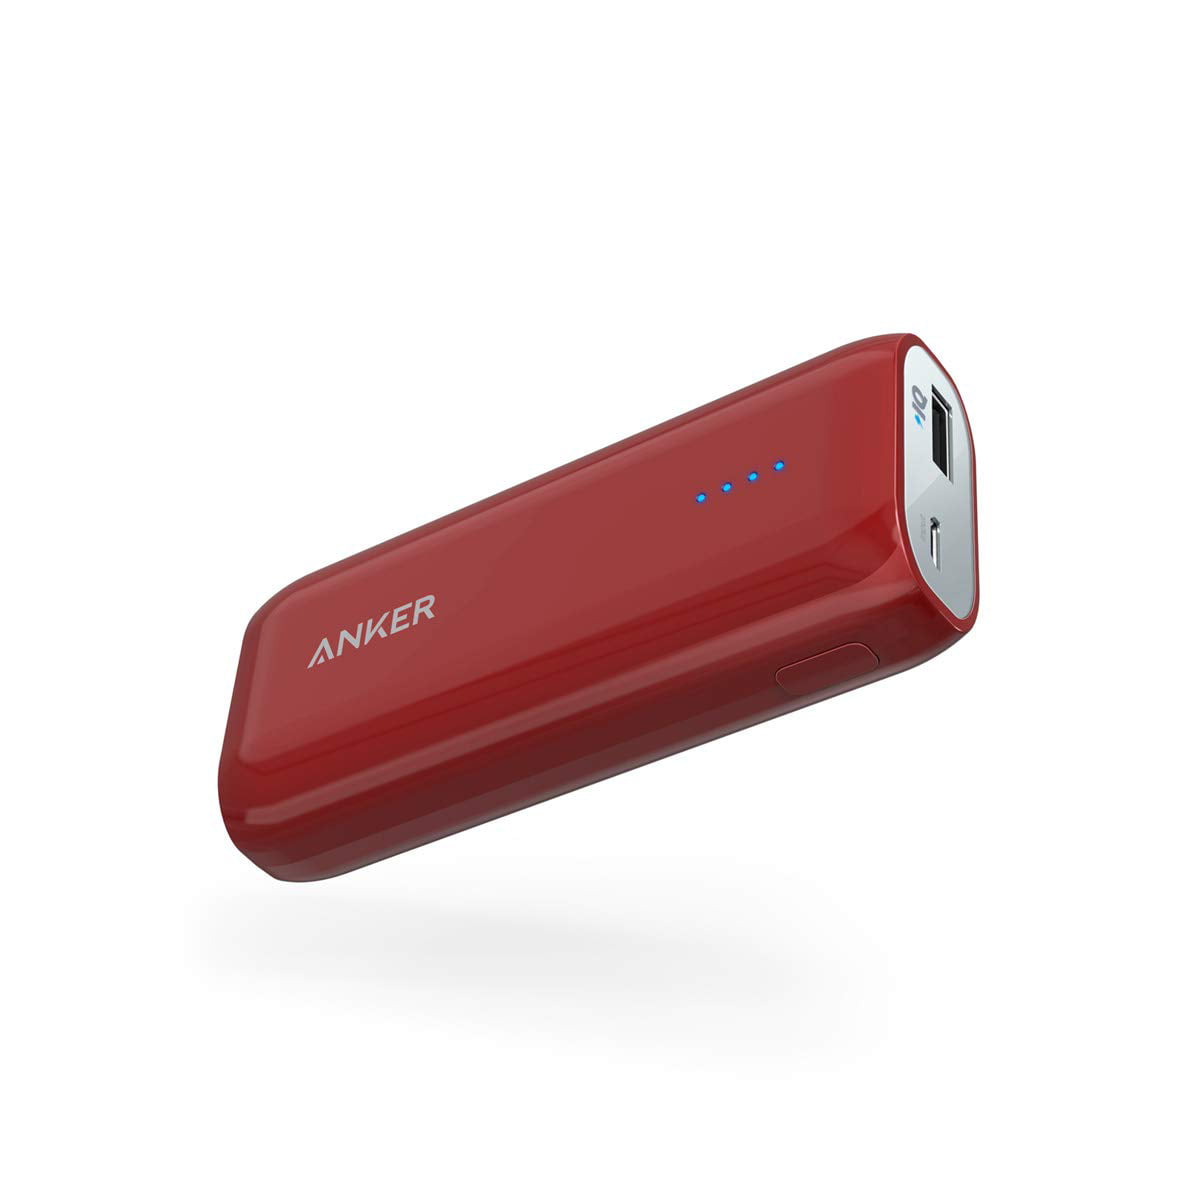 Anker [Upgraded to 6700mAh] Astro E1 Candy-Bar Sized Ultra Compact Portable Charger, External Bank, with PowerIQ Technology (Red) Walmart.com